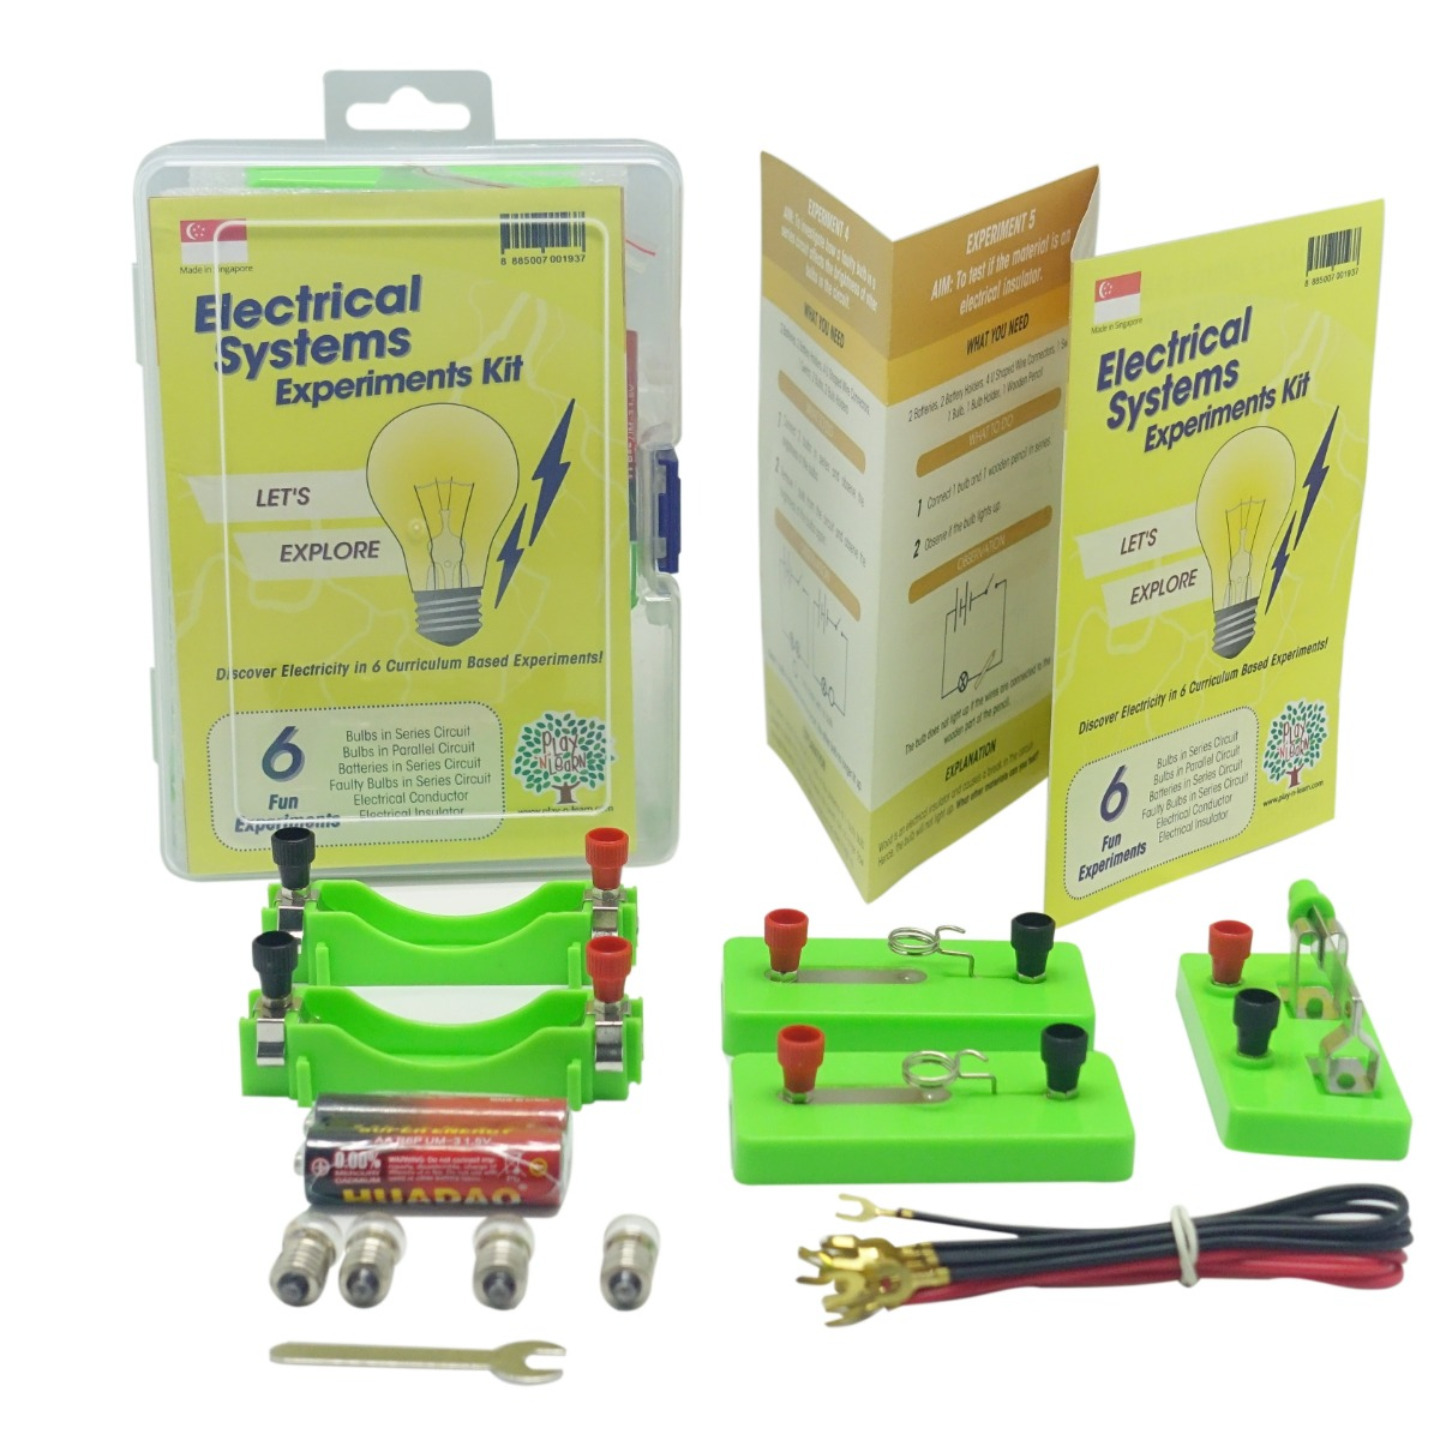 STEM Play N Learn 6 Experiments on Electrical Systems Teaching Resource Learning Kit